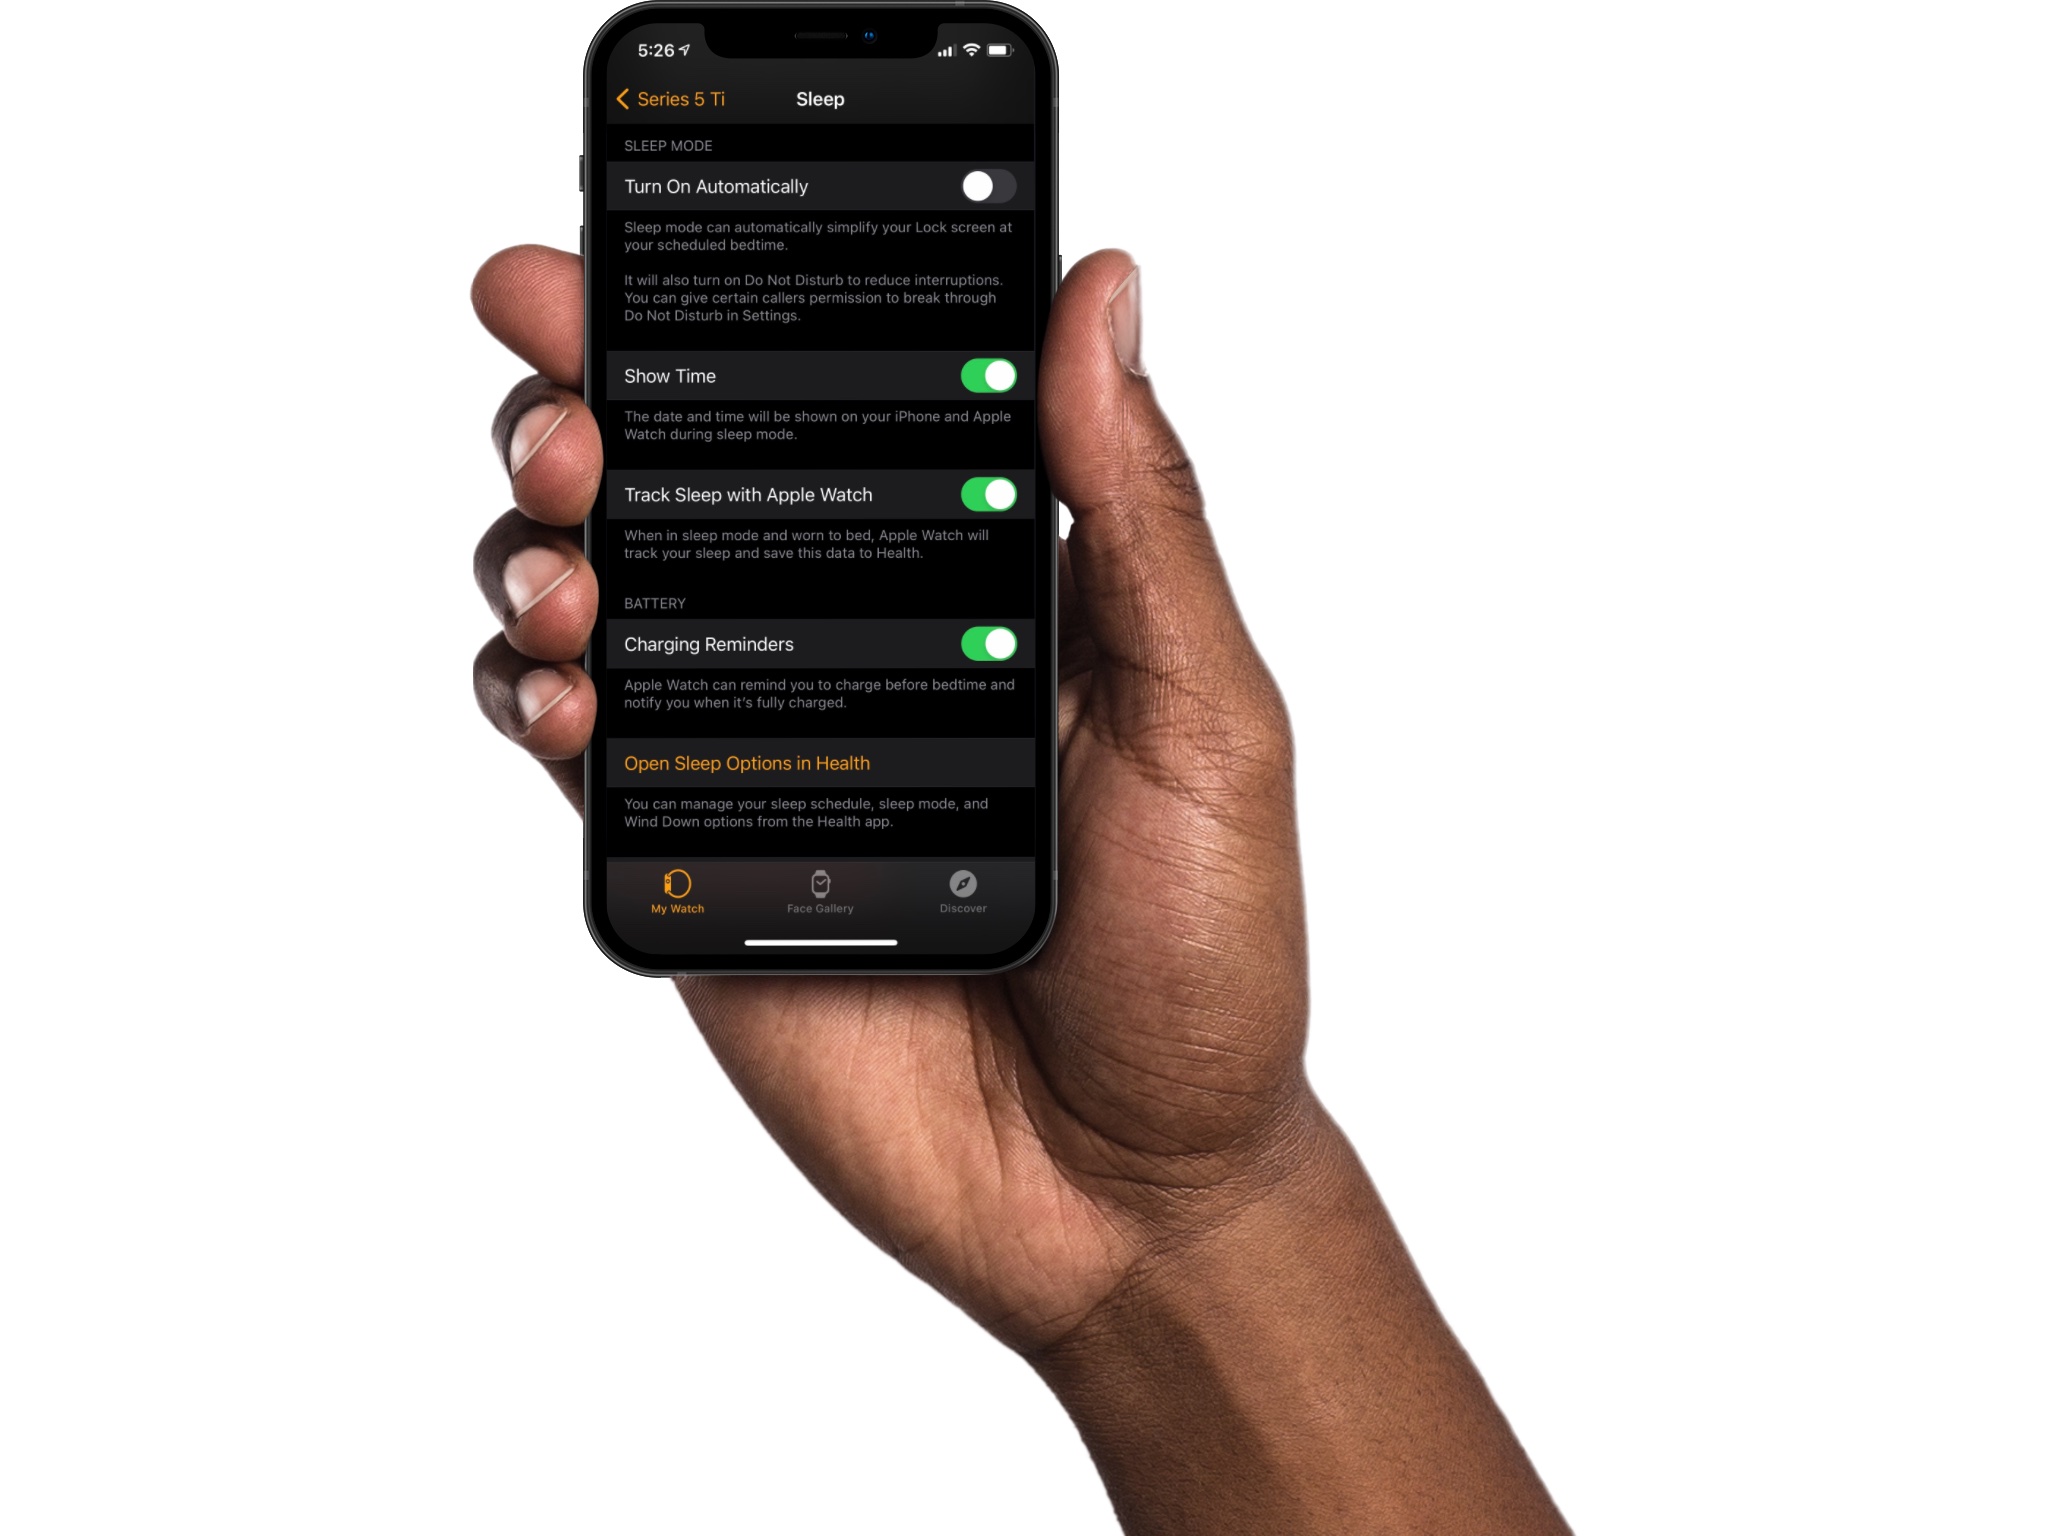 Awaken klinge ankomme How to get notified when your Apple Watch is fully charged